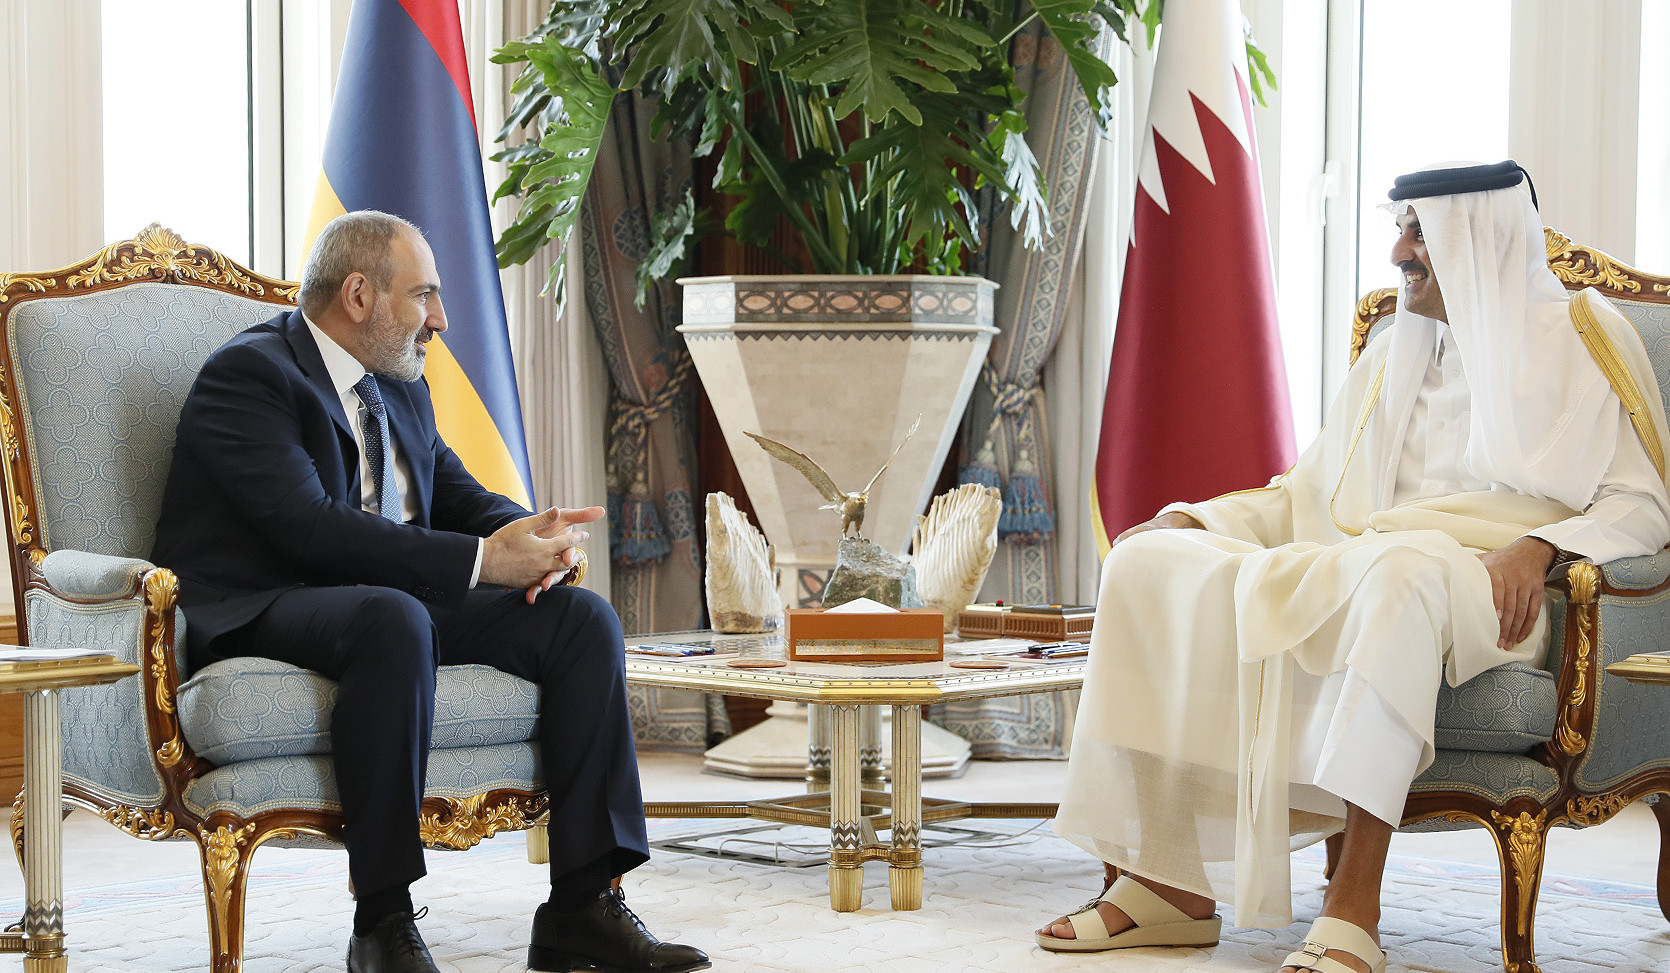 Armenian PM and Emir of Qatar discuss number of issues related to development of cooperation between two countries